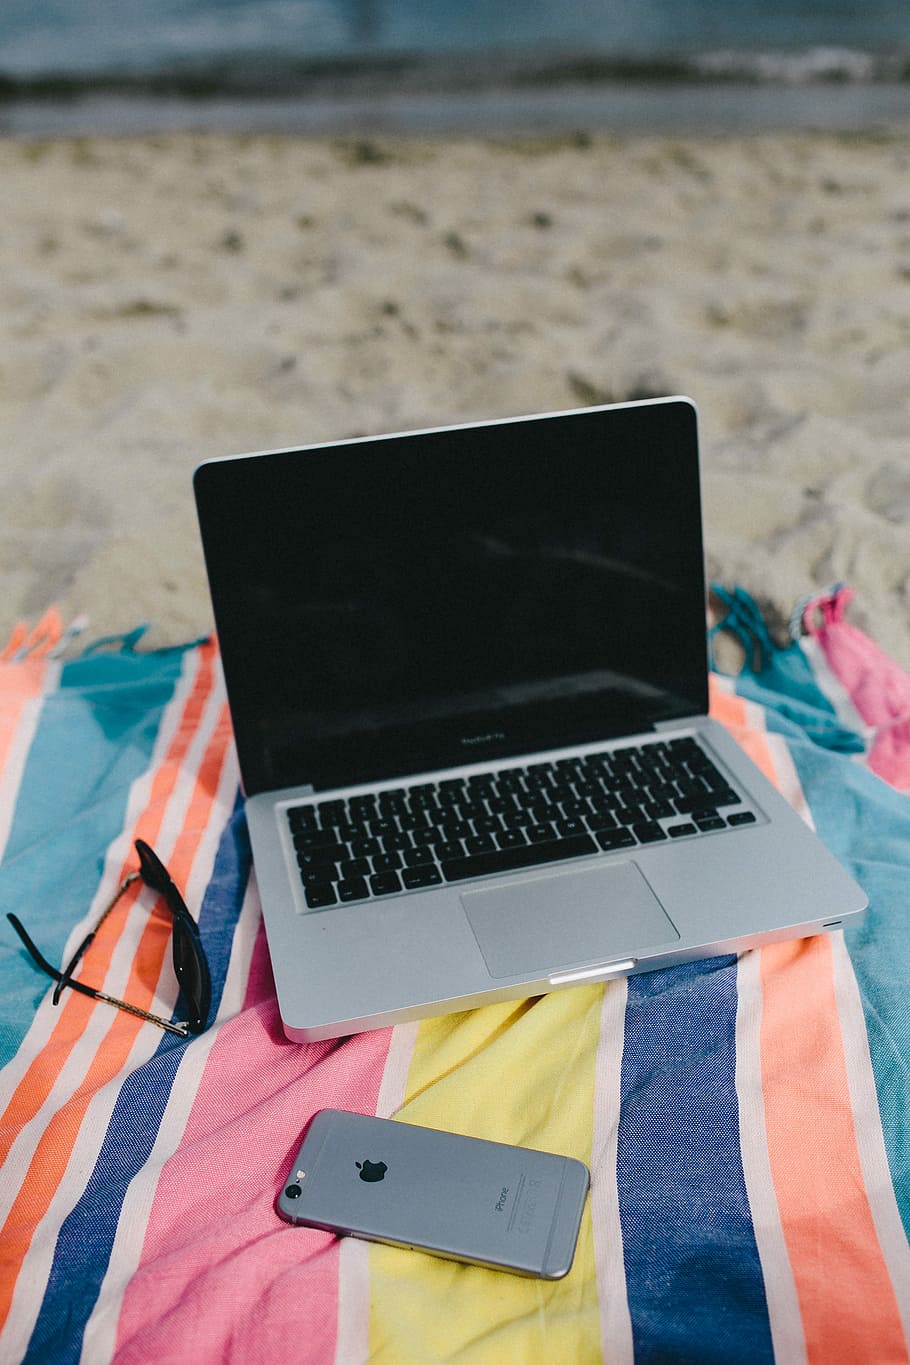 Together at the beach, sand, summer, computer, macbook, laptop